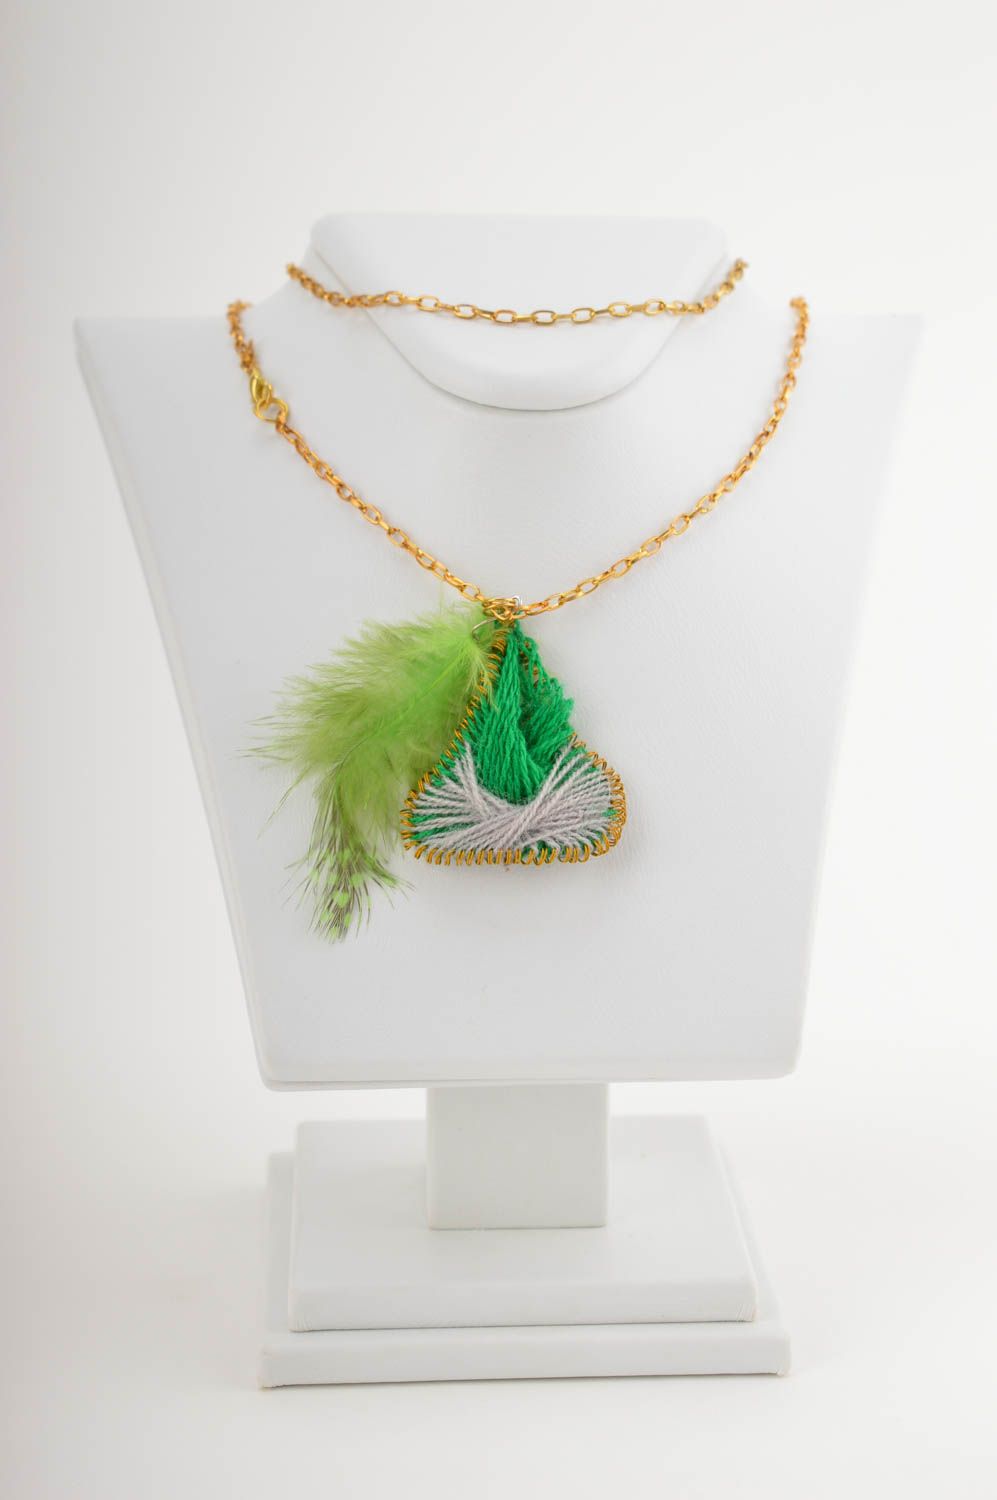 Beautiful handmade textile pendant with feathers wire pendant necklace photo 1